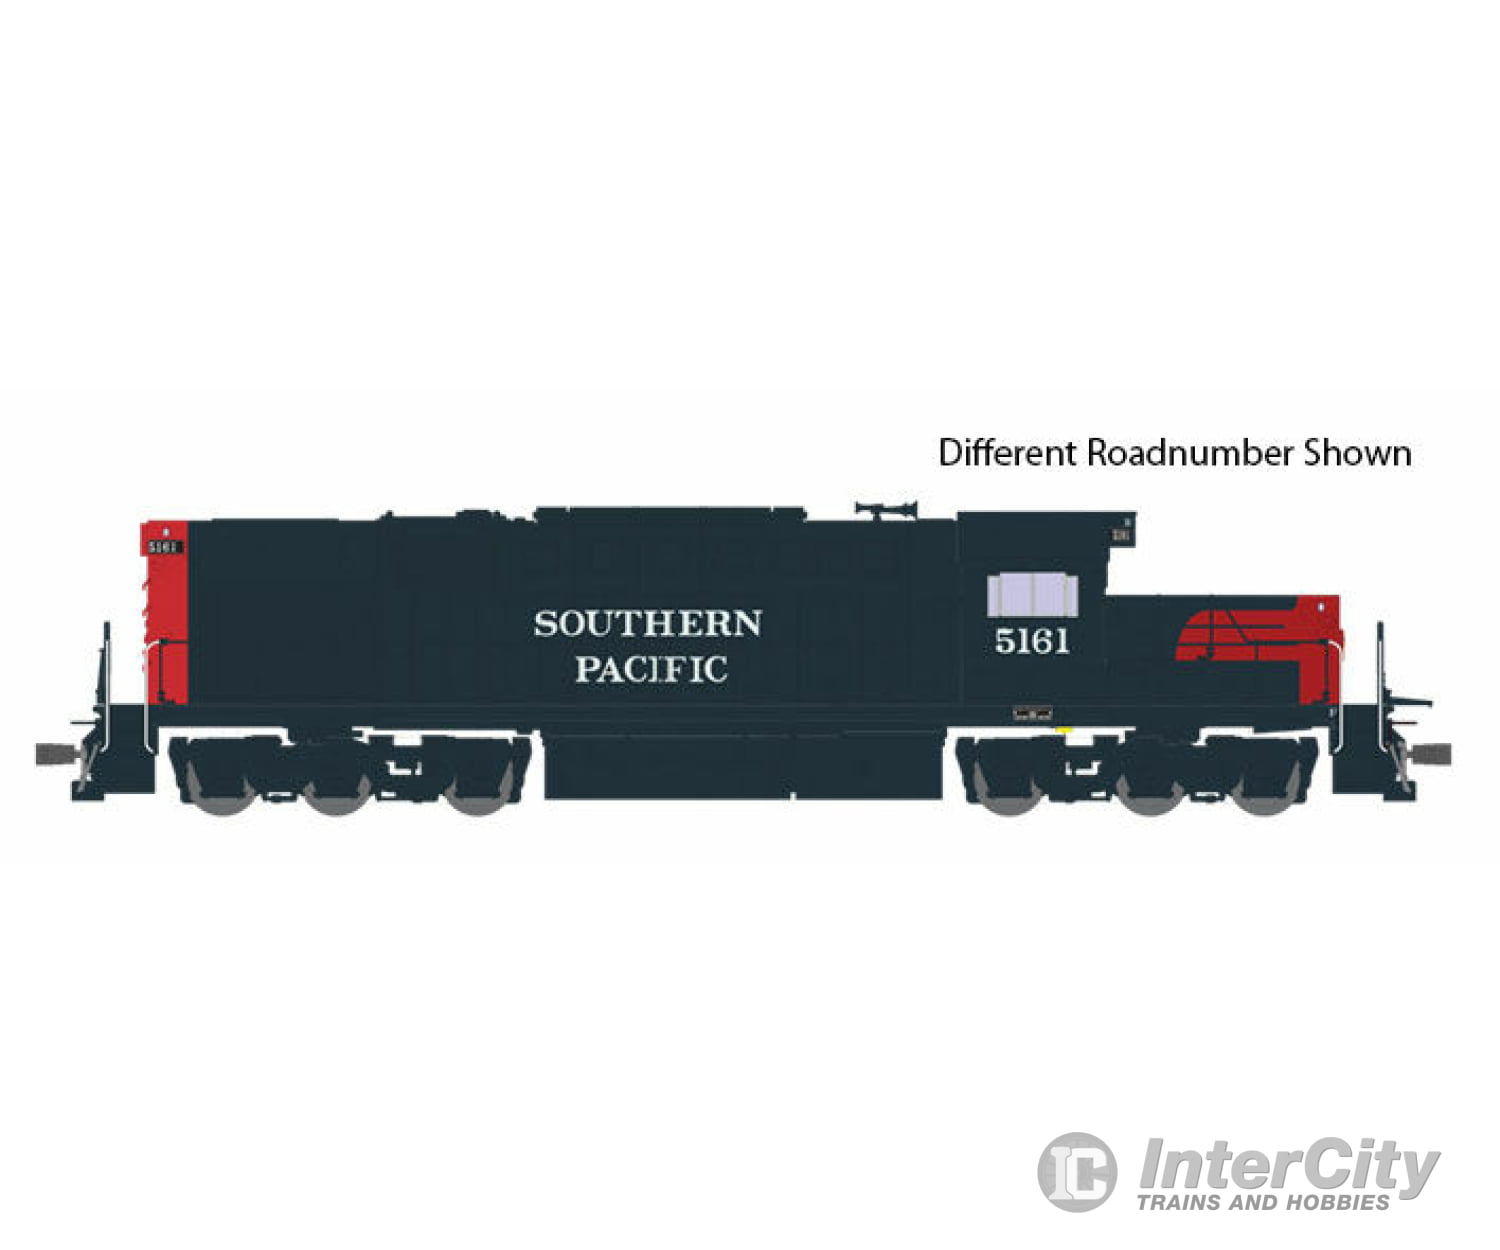 Broadway Limited 4889 Ho Alco Rsd15 Low Nose W/Sound & Dcc - Paragon3(Tm) -- Southern Pacific #5162